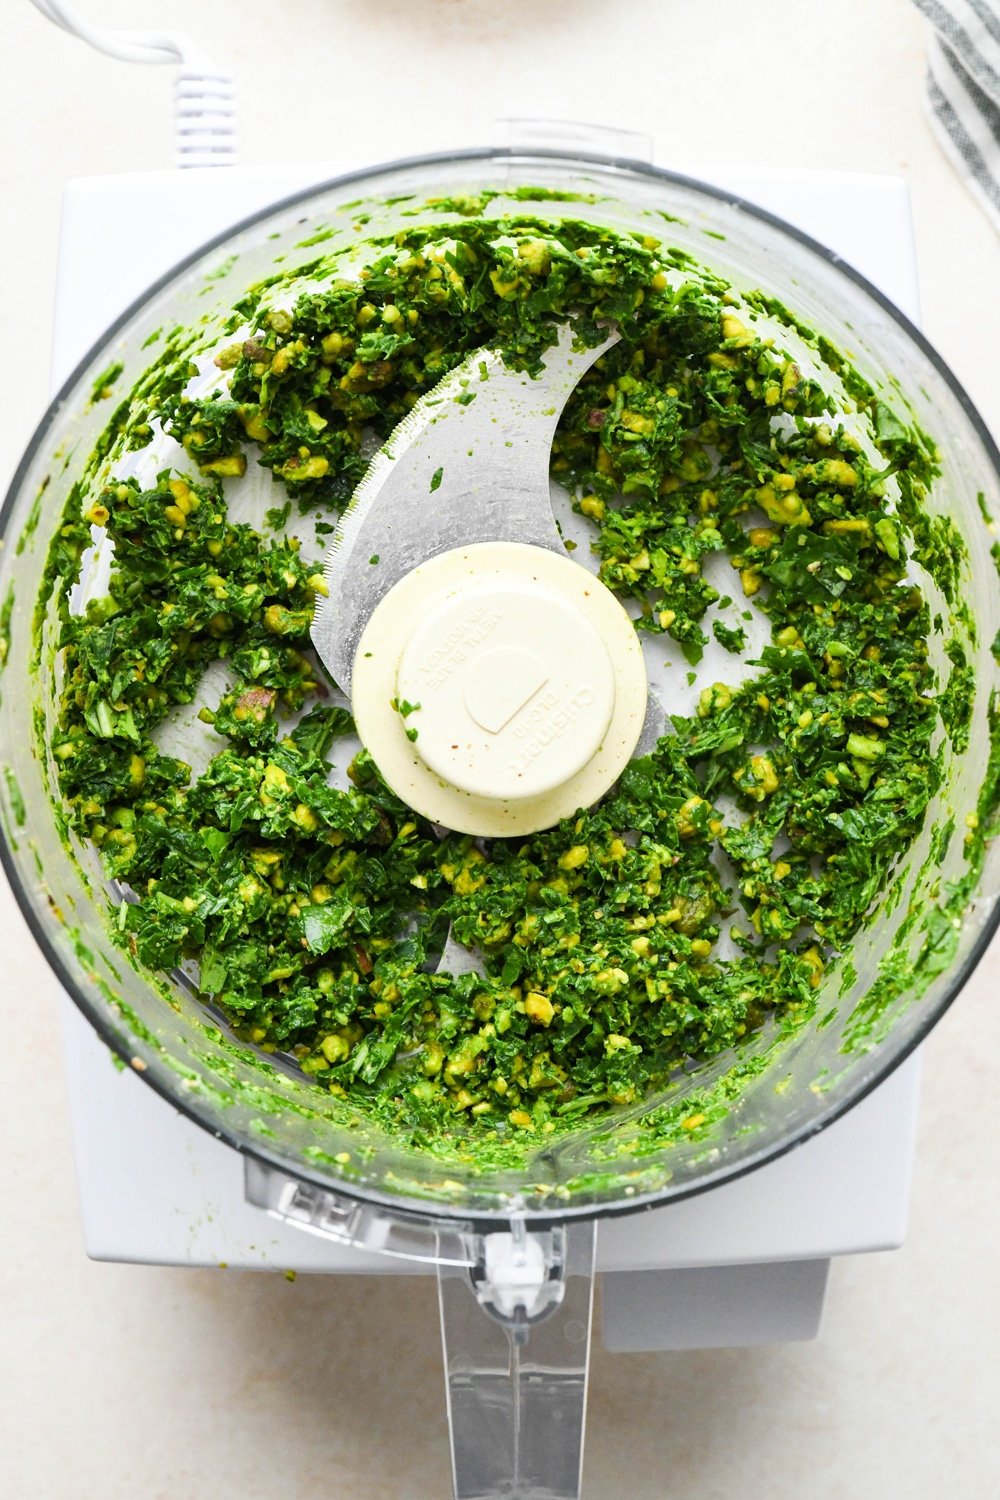 How to make pistachio pesto: Dry ingredients in the container of a food processor after pulsing together. 